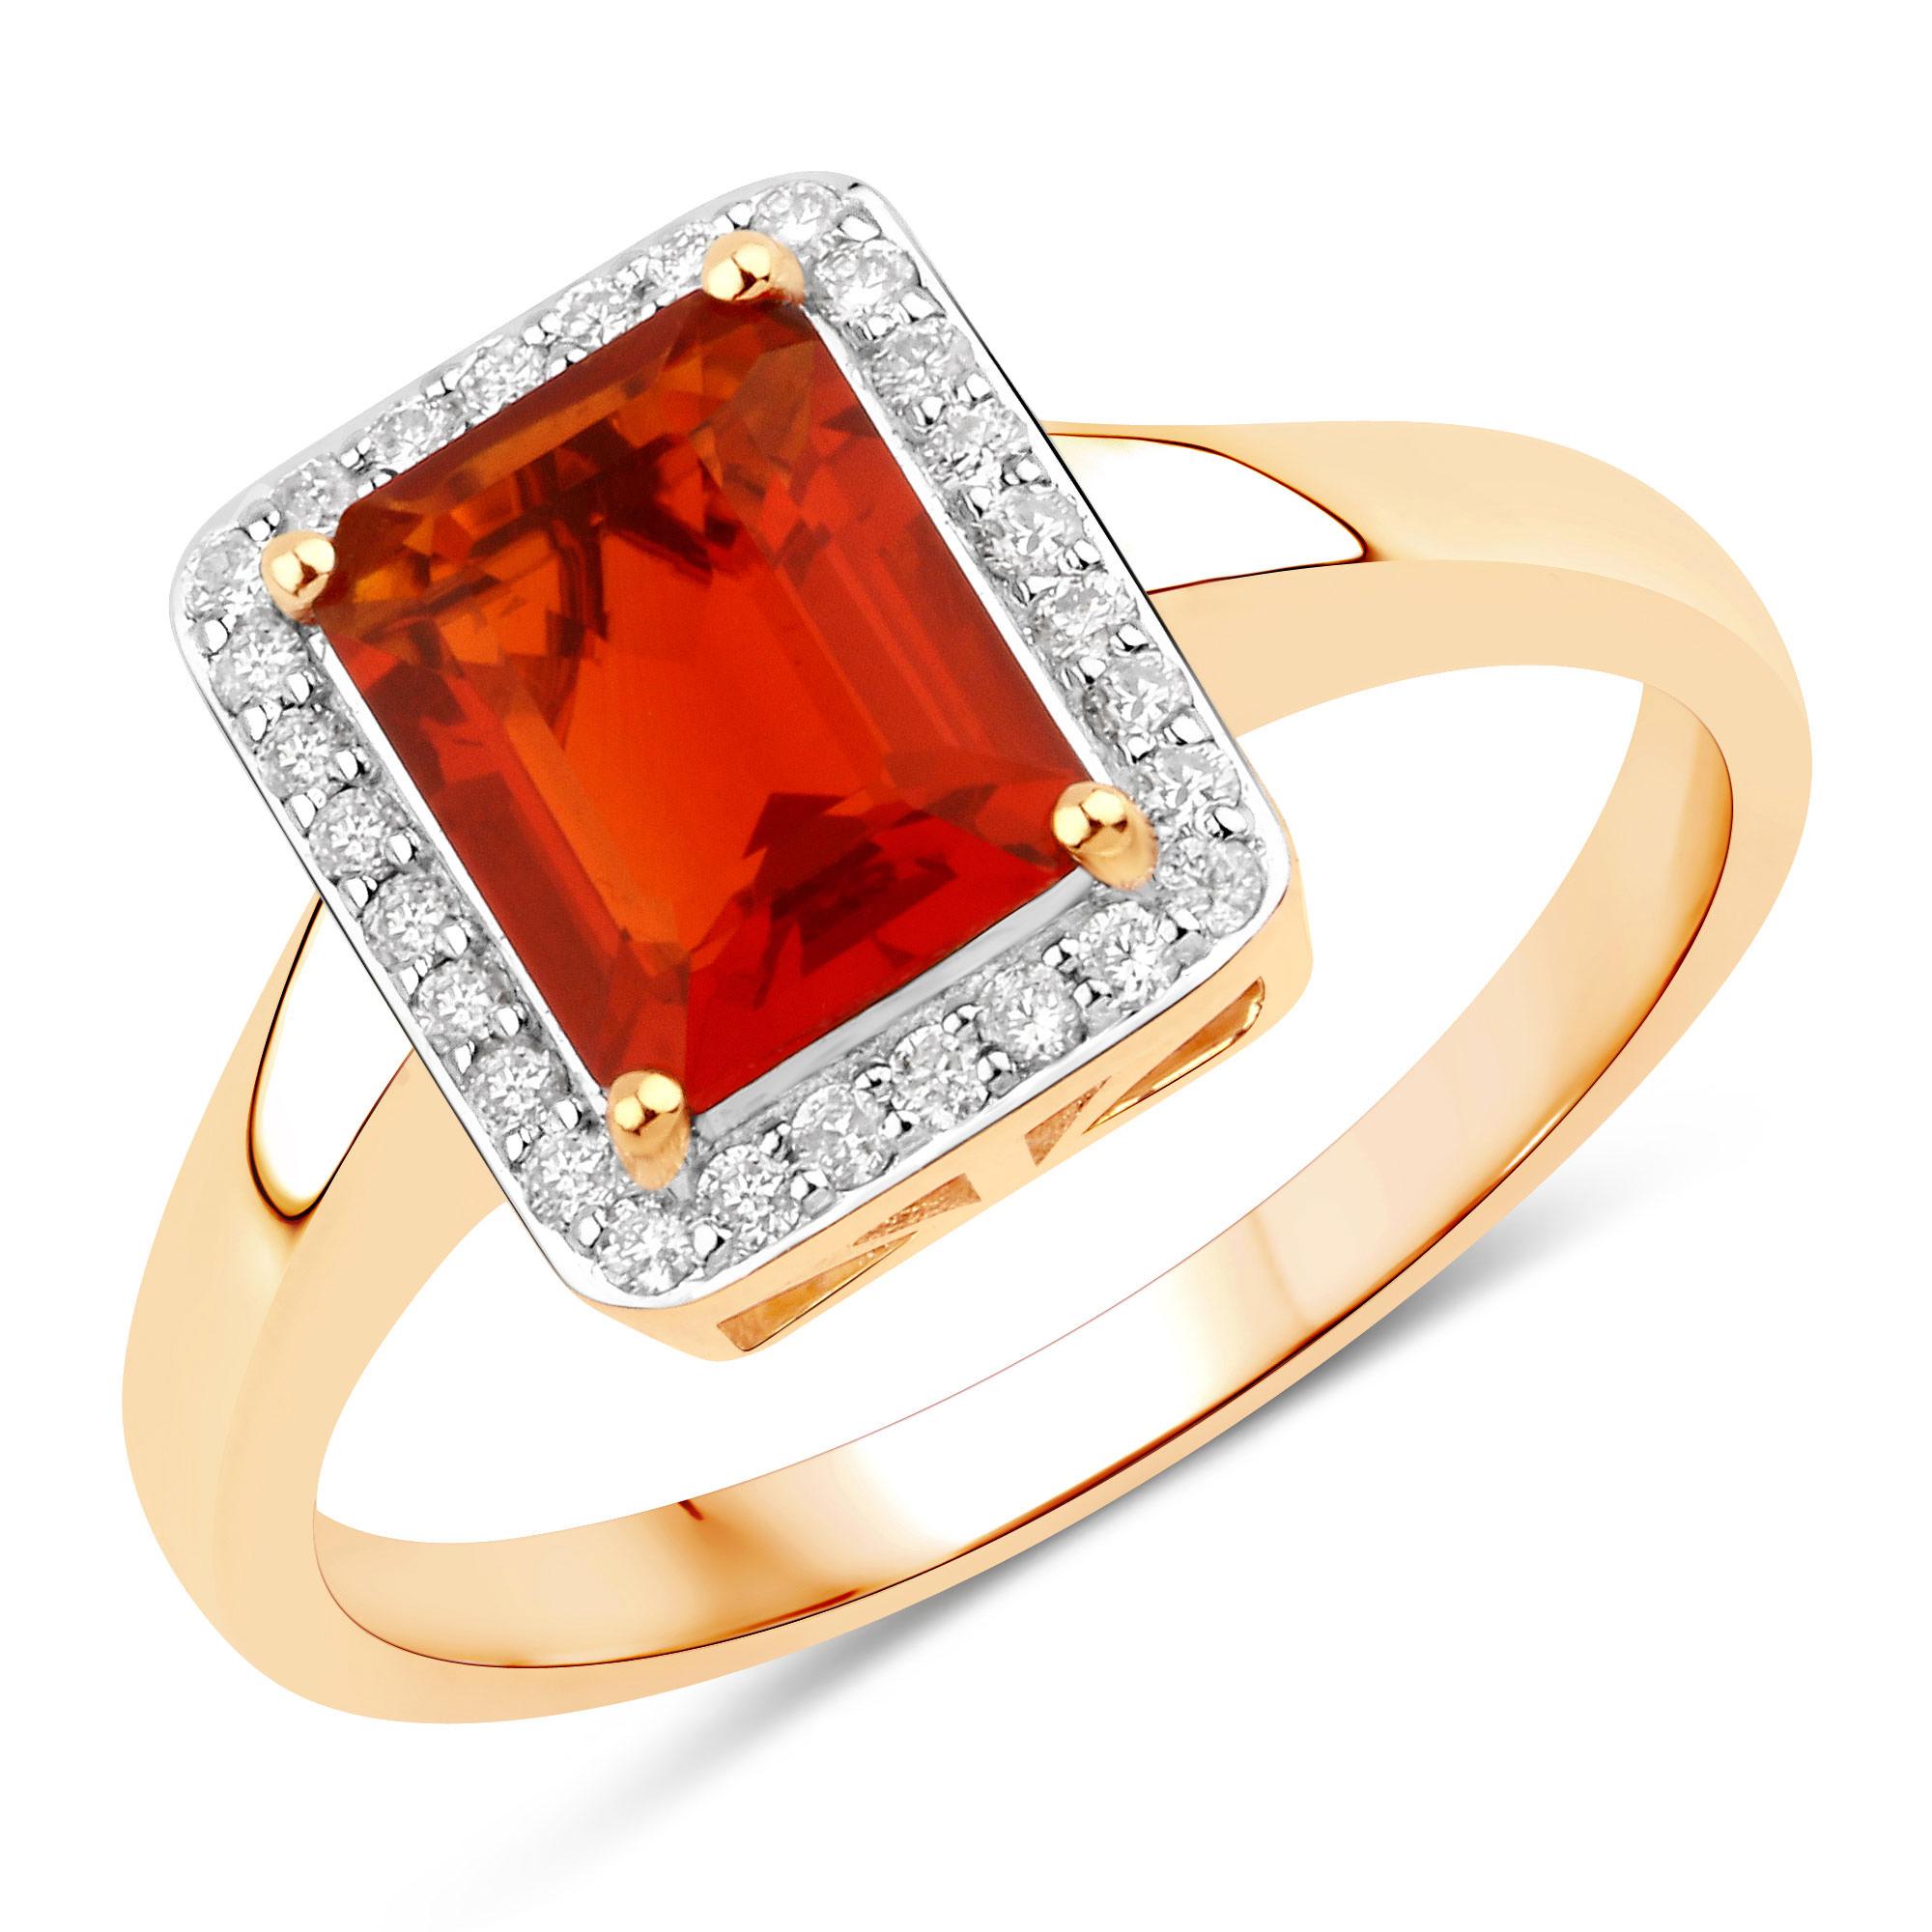 It comes with the appraisal by GIA GG/AJP
All Gemstones are Natural
Fire Opal = 1 Carat
28 Round Diamonds = 0.20 Carats
Metal: 14K Yellow Gold
Ring Size: 7* US
*It can be resized complimentary